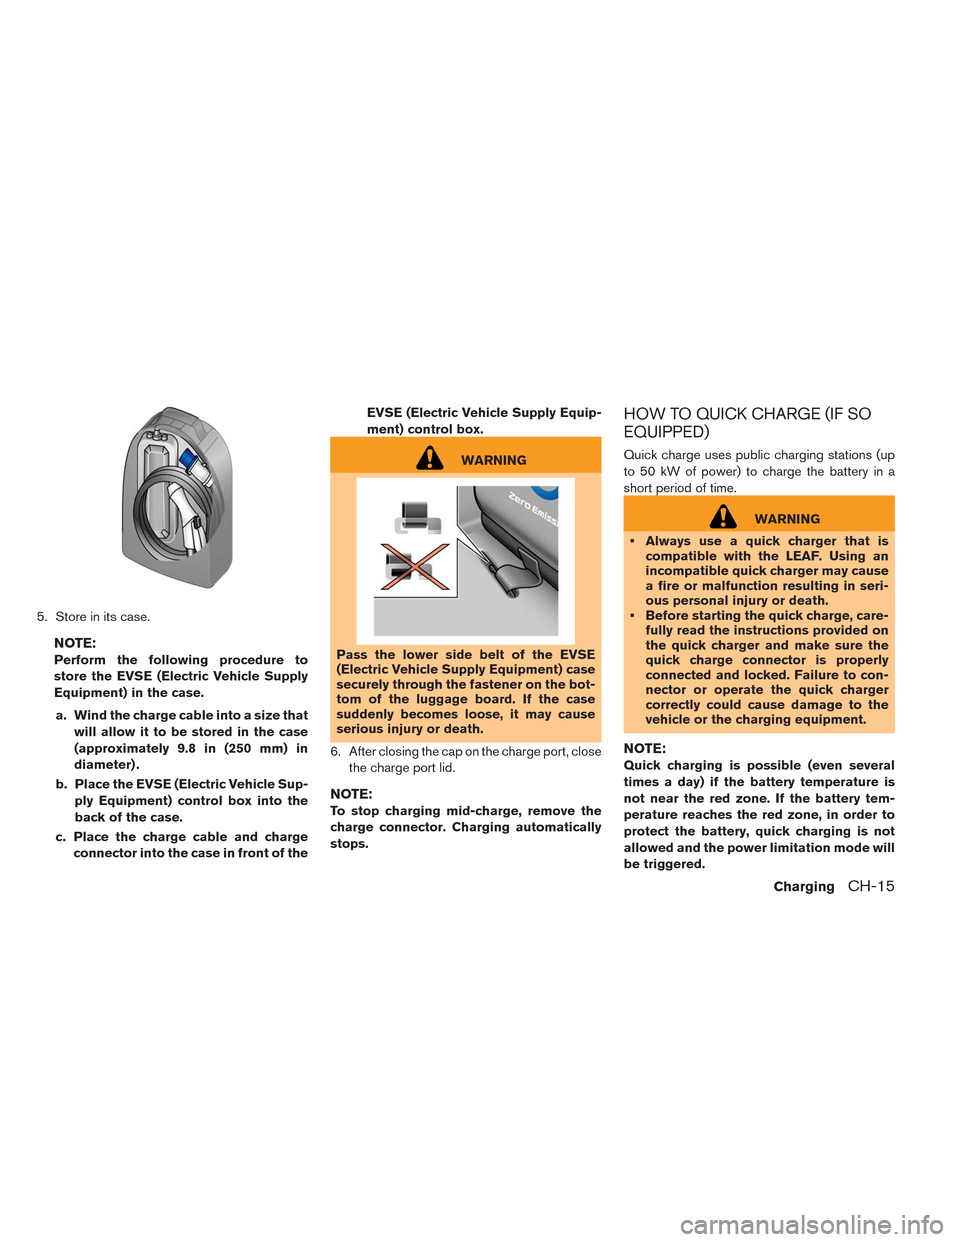 NISSAN LEAF 2014 1.G Repair Manual 5. Store in its case.
NOTE:
Perform the following procedure to
store the EVSE (Electric Vehicle Supply
Equipment) in the case.
a. Wind the charge cable into a size that
will allow it to be stored in t